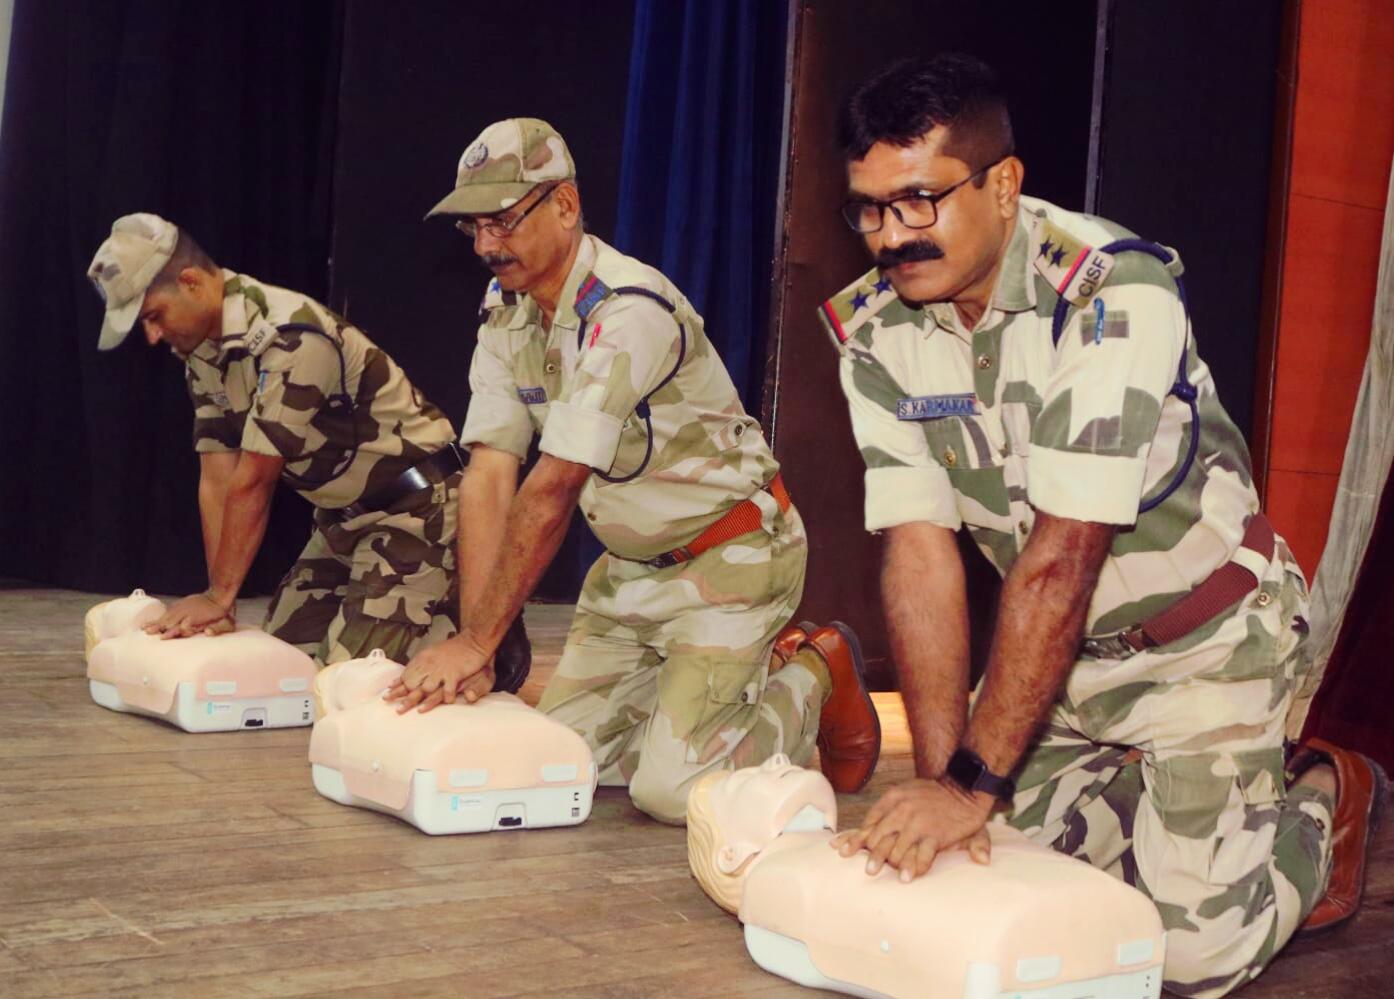 Medica Superspecialty Hospital and Indian Museum Kolkata join forces to host life-saving Basic Life Support (BLS) session